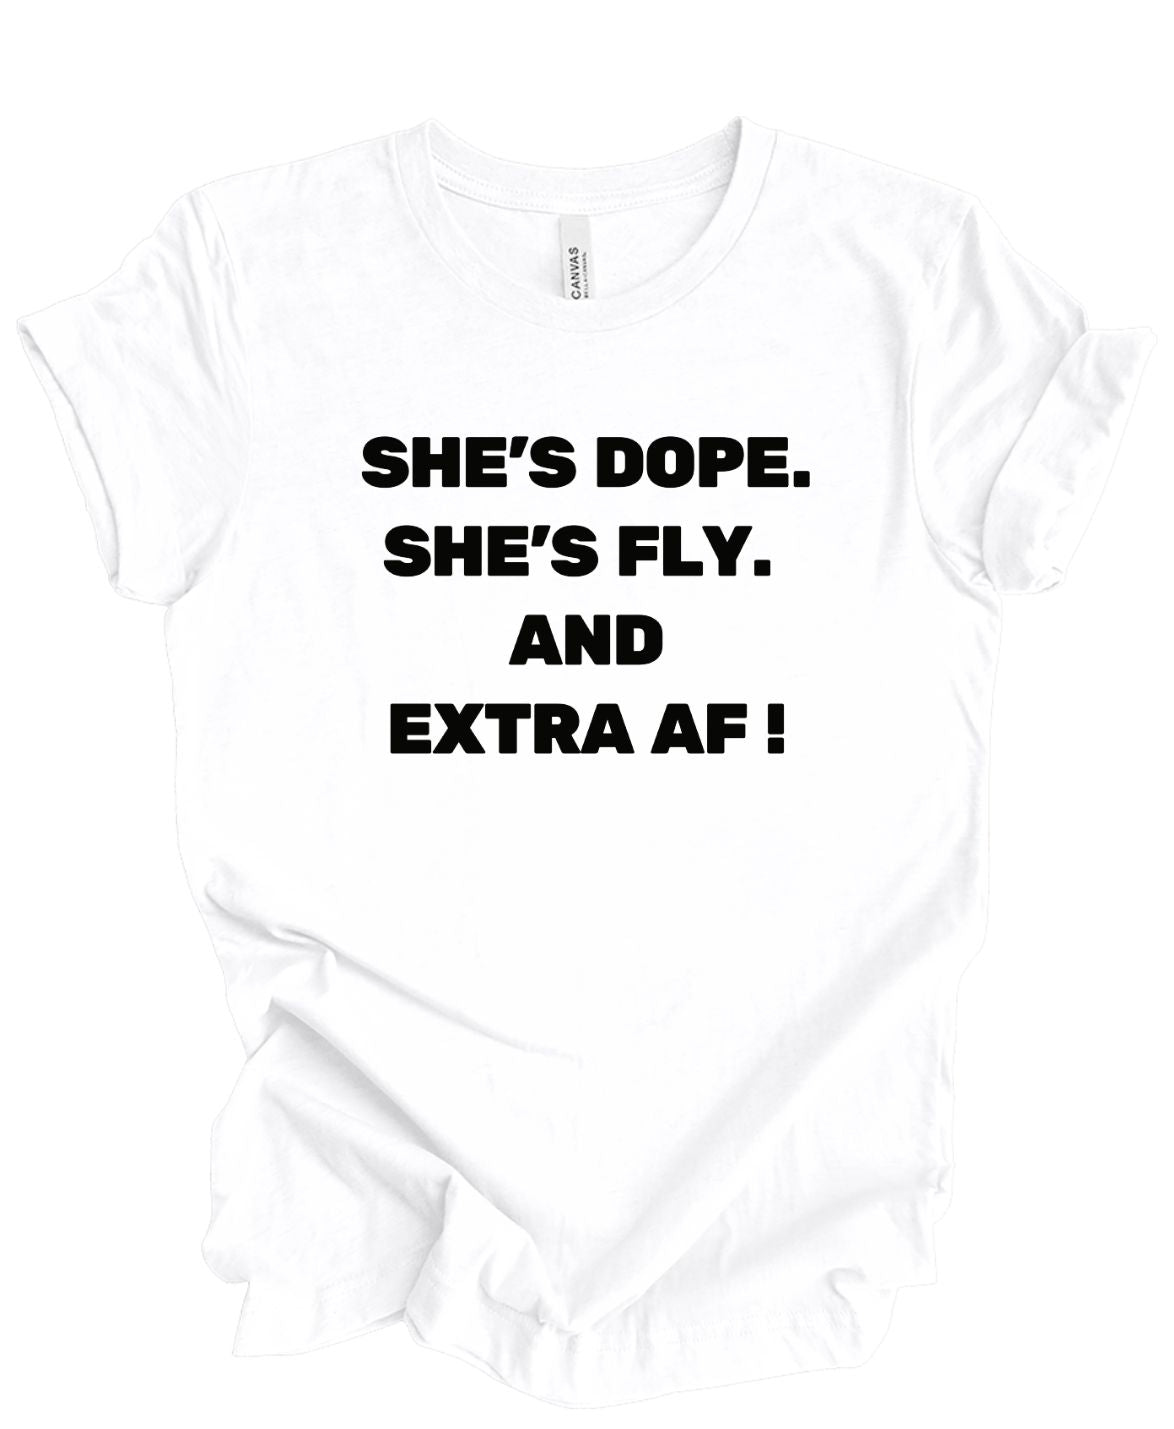 She's Dope, Fly, and Extra AF T-Shirt